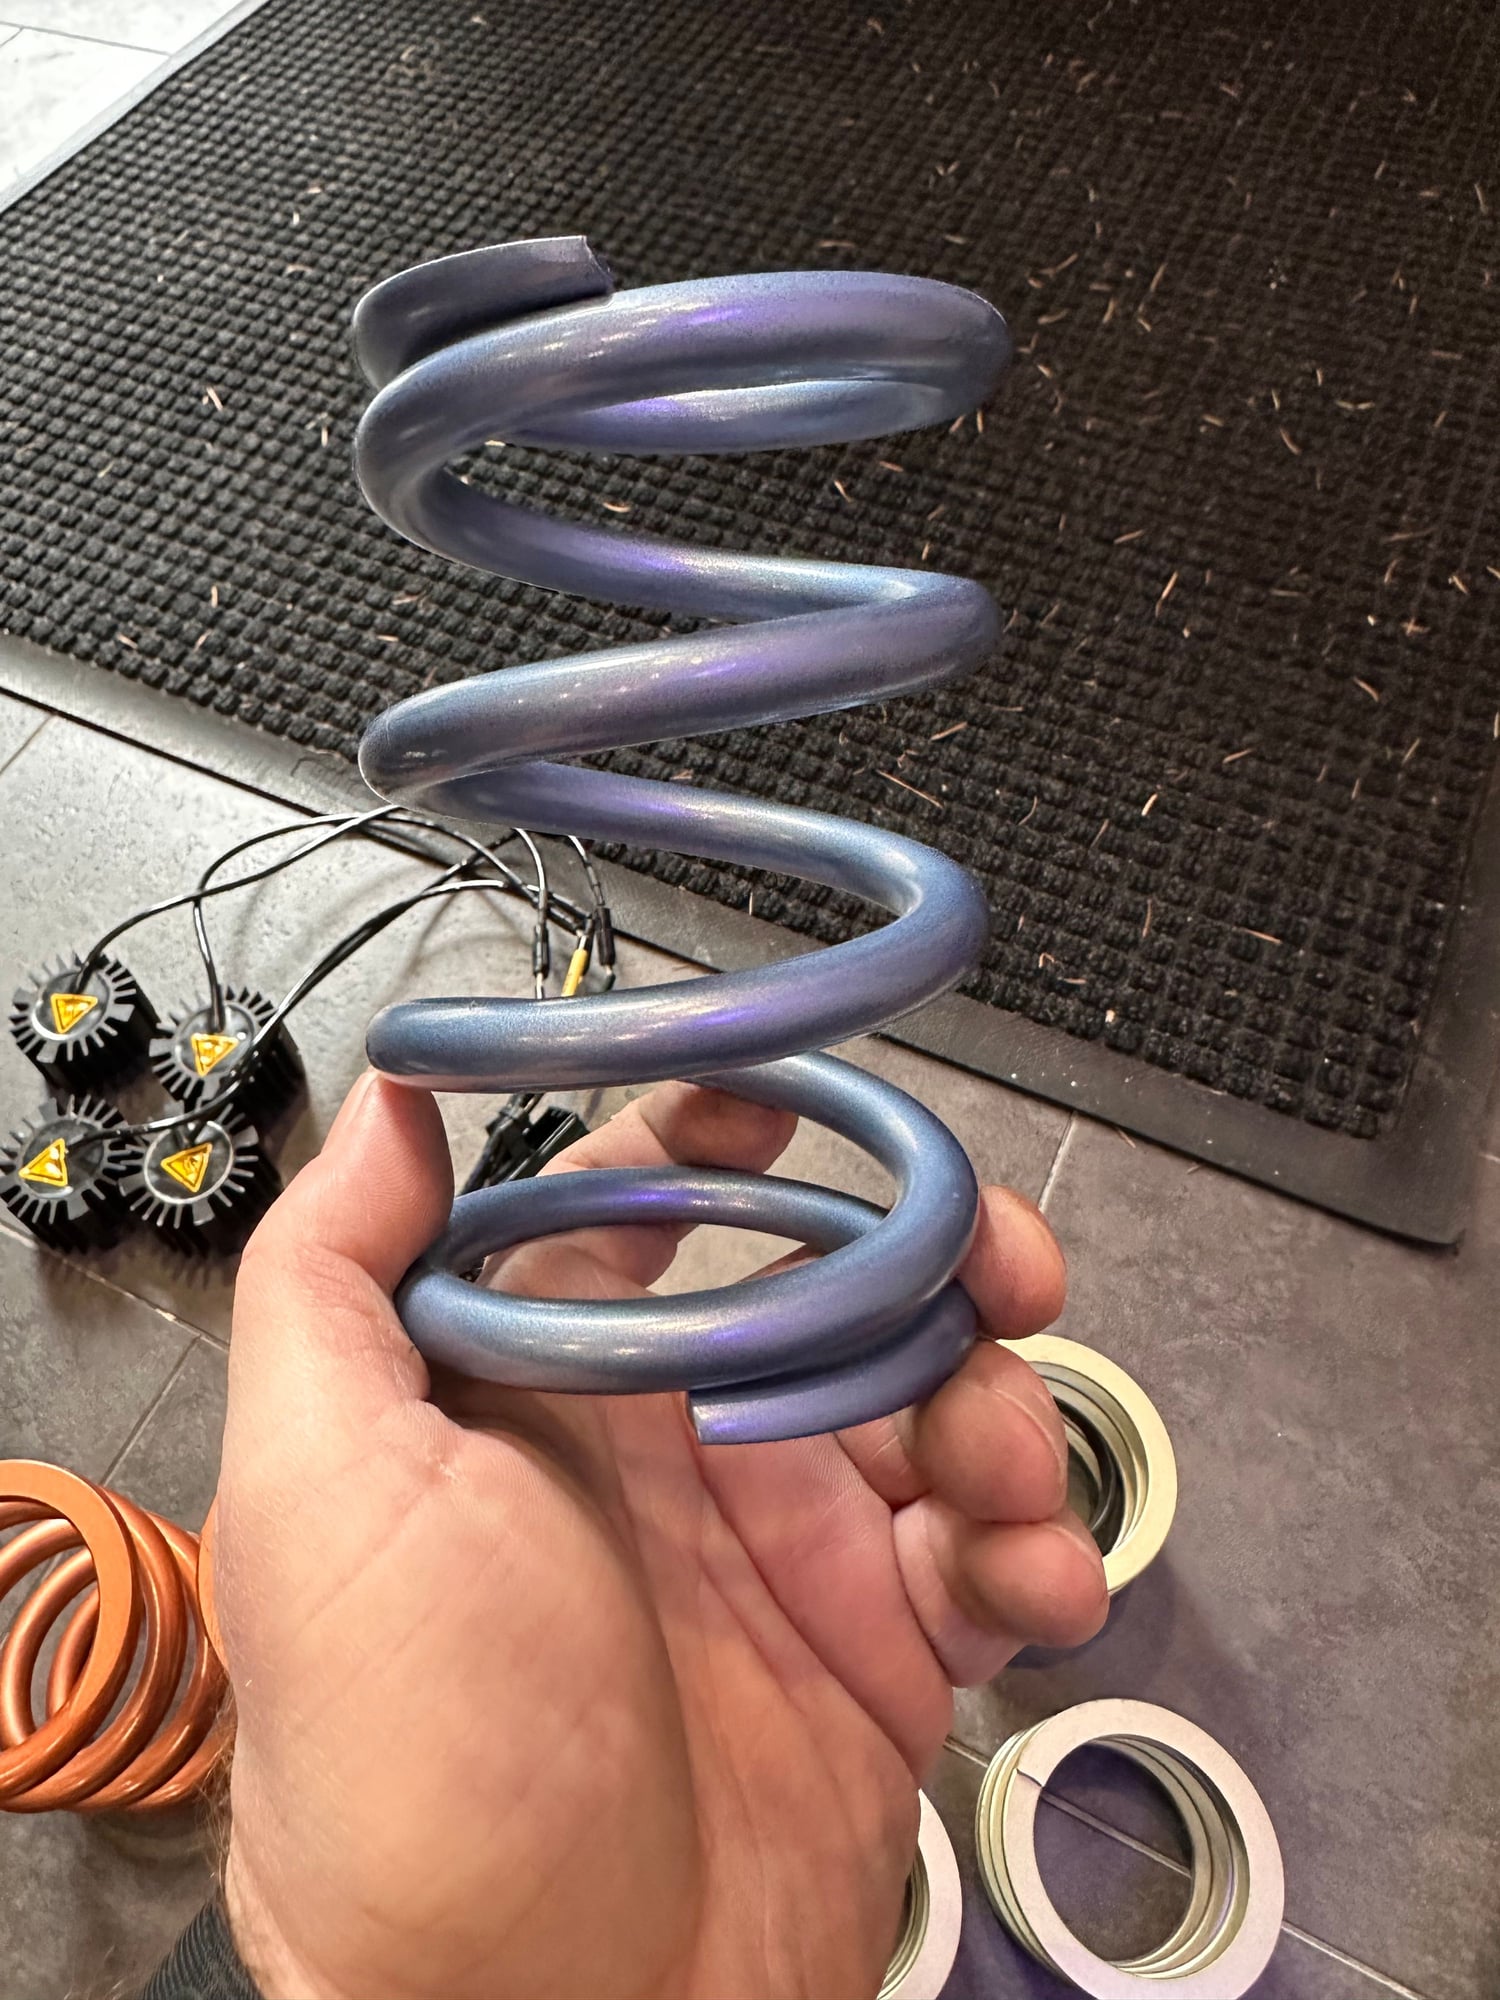 2019 Porsche GT3 - E-Motion Engineering Lowering Springs - Steering/Suspension - $500 - Gig Harbor, WA 98335, United States